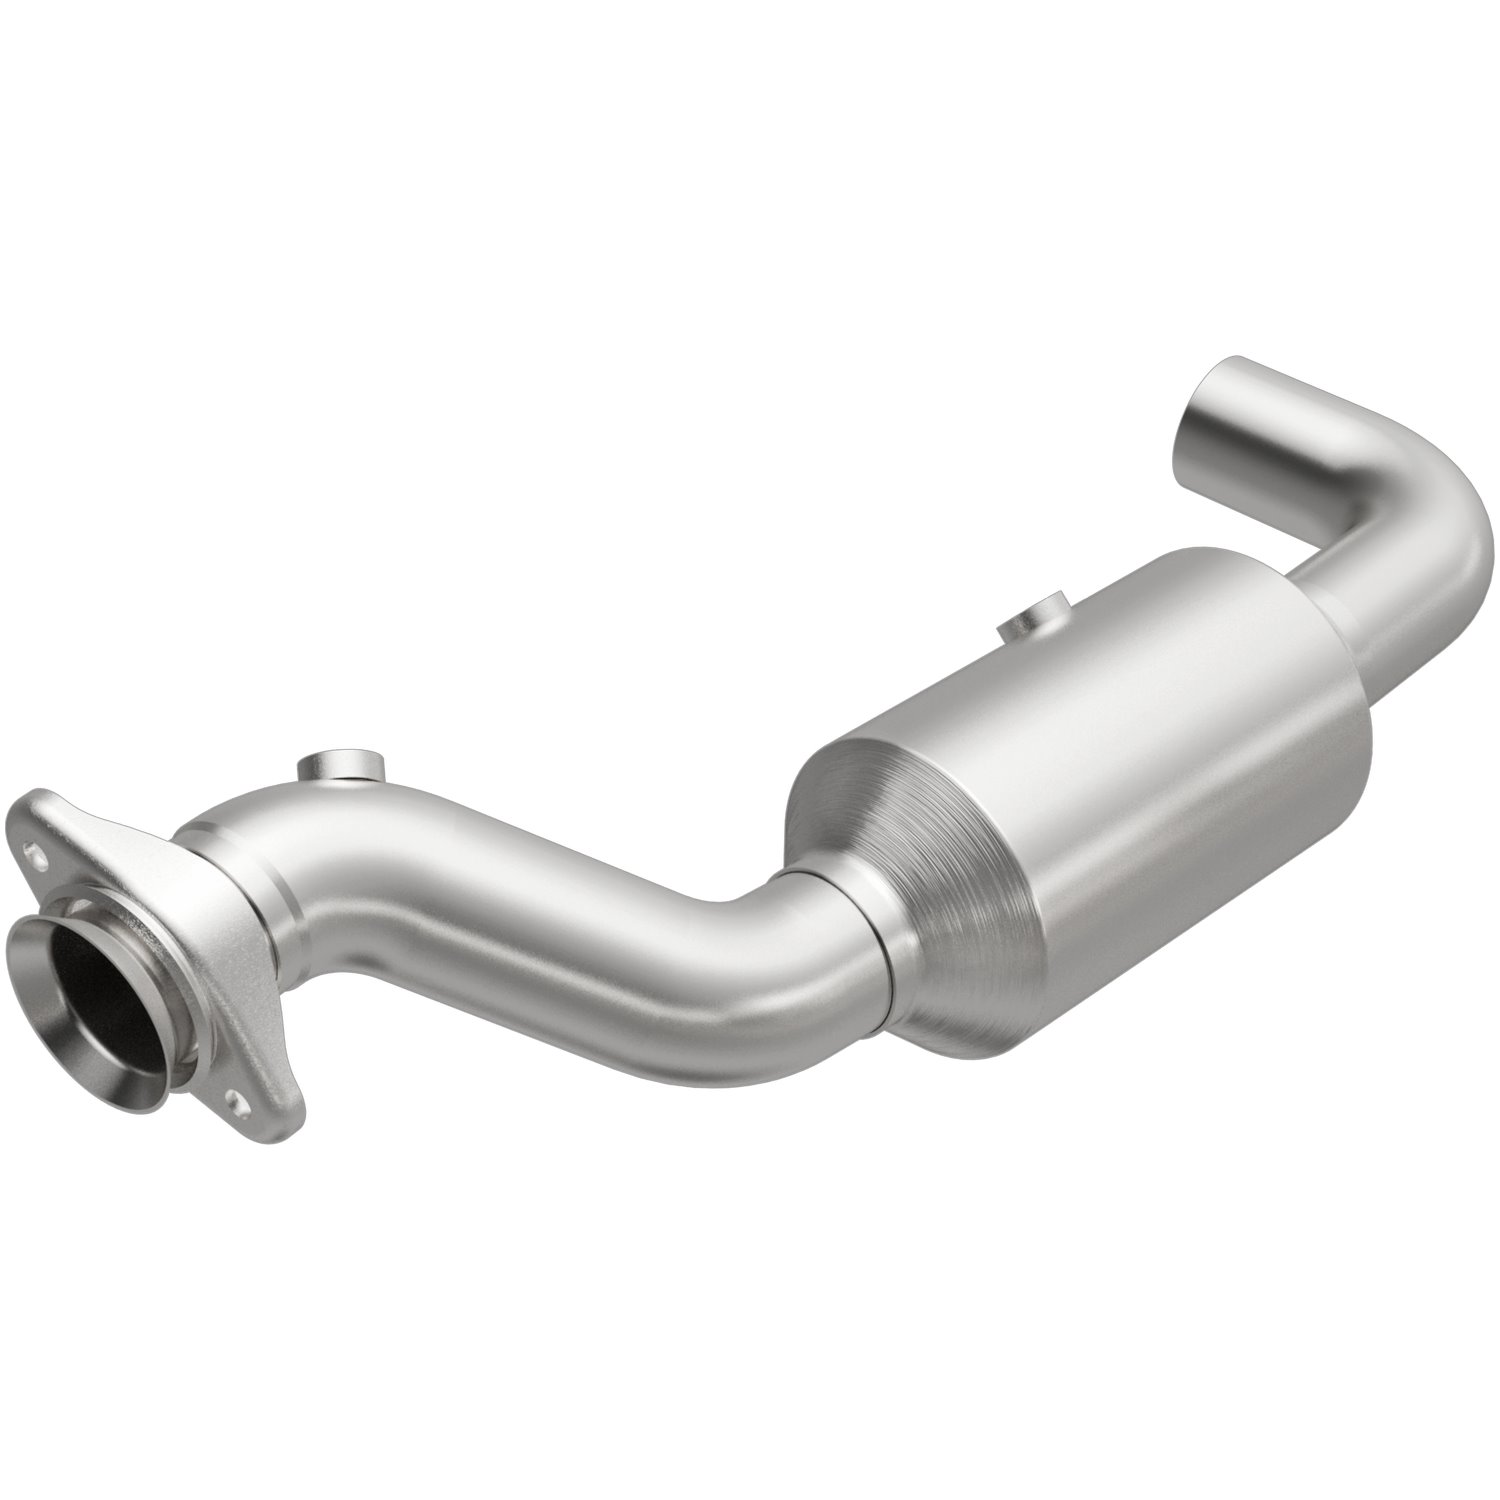 2015-2020 Ford F-150 OEM Grade Federal / EPA Compliant Direct-Fit Catalytic Converter 21-474